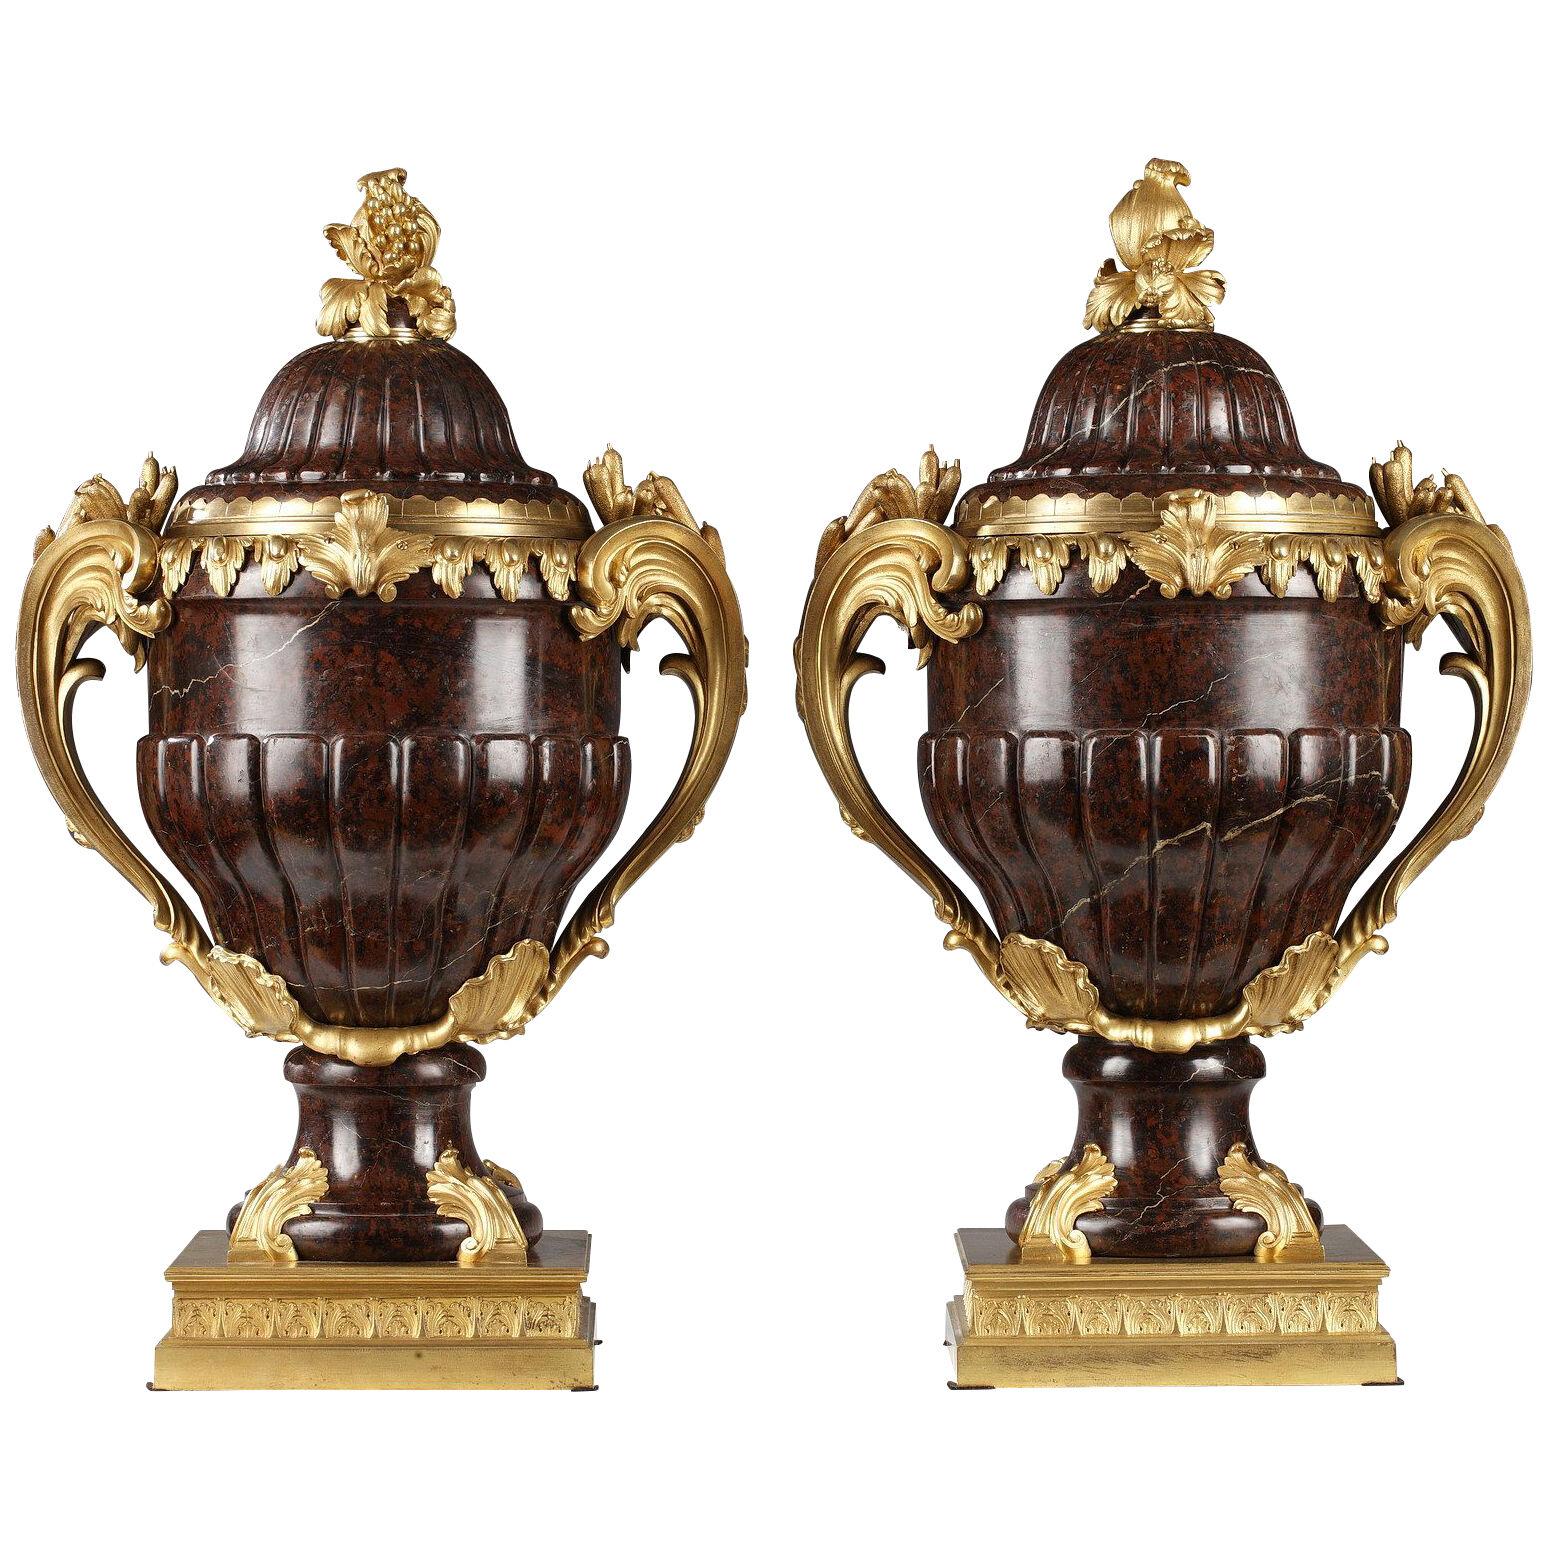 Pair of Marble Covered Vases Attributed to Maison Lexcellent, France, Circa 1890